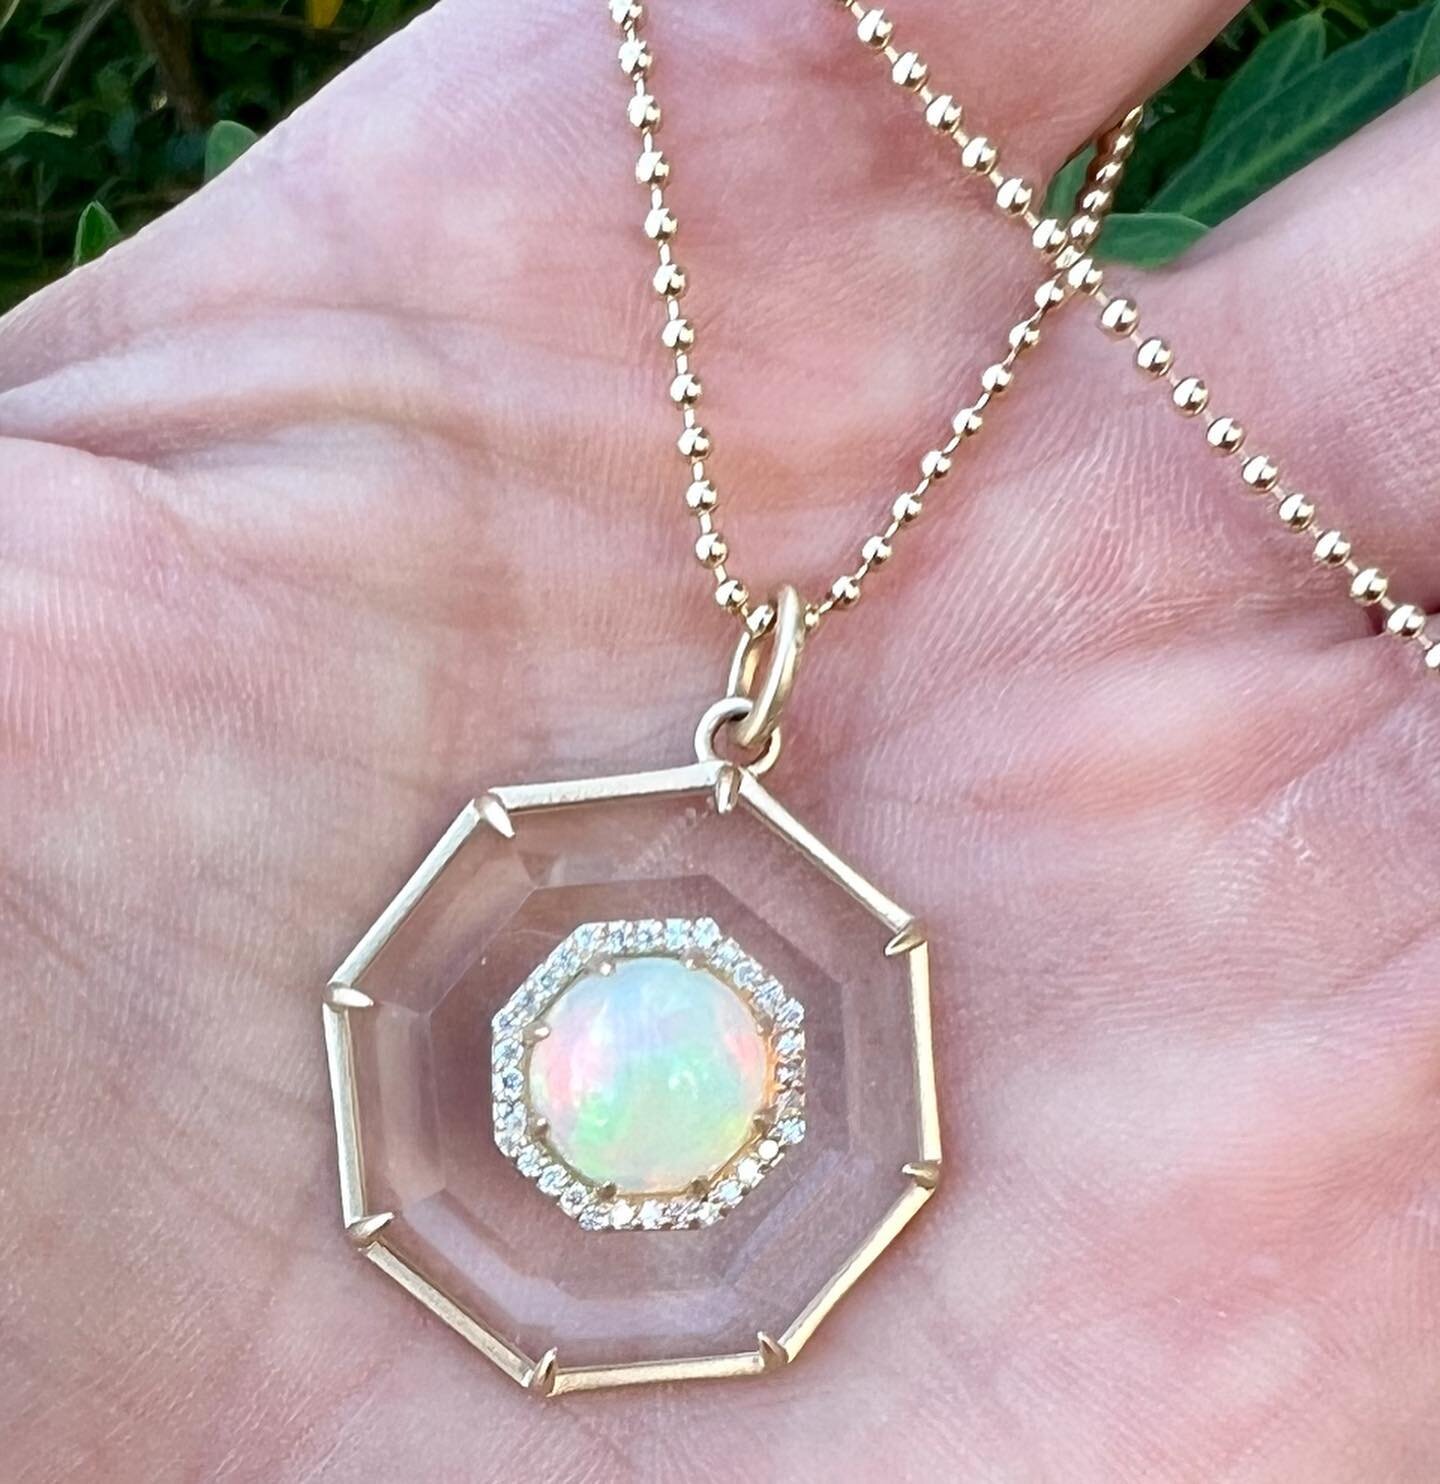 Did you know that opals are a symbol of hope and truth? 

Swipe to see this beautiful pendant from another angle. 
.
.
.

.
#necklace #neckcandy #opal #ethiopianopal #rockcrystal #diamonds #sparkle #designerjewelry #necklaceoftheday #necklacesofinsta